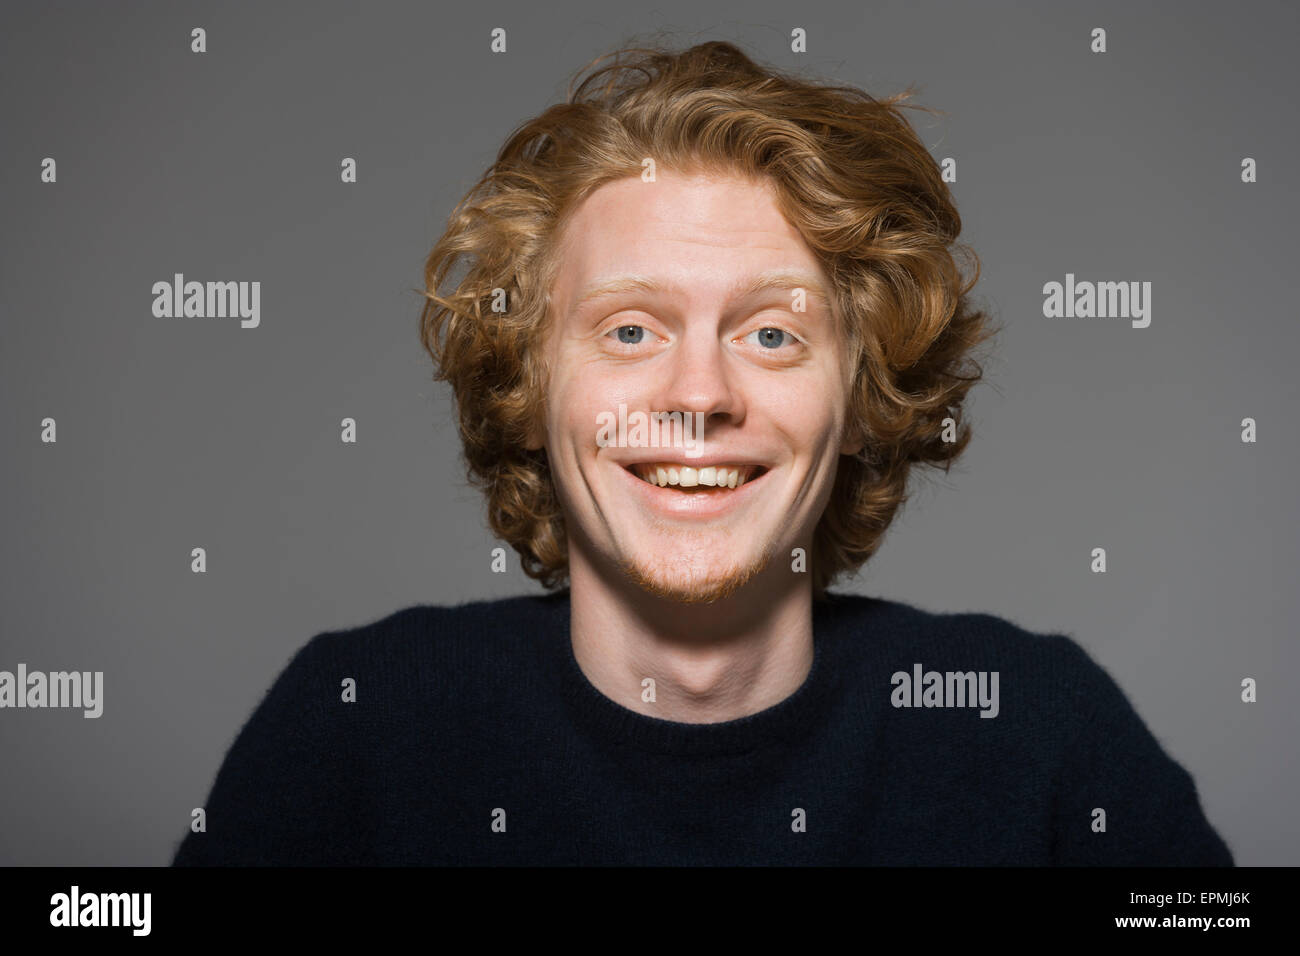 Portrait of laughing young man Stock Photo